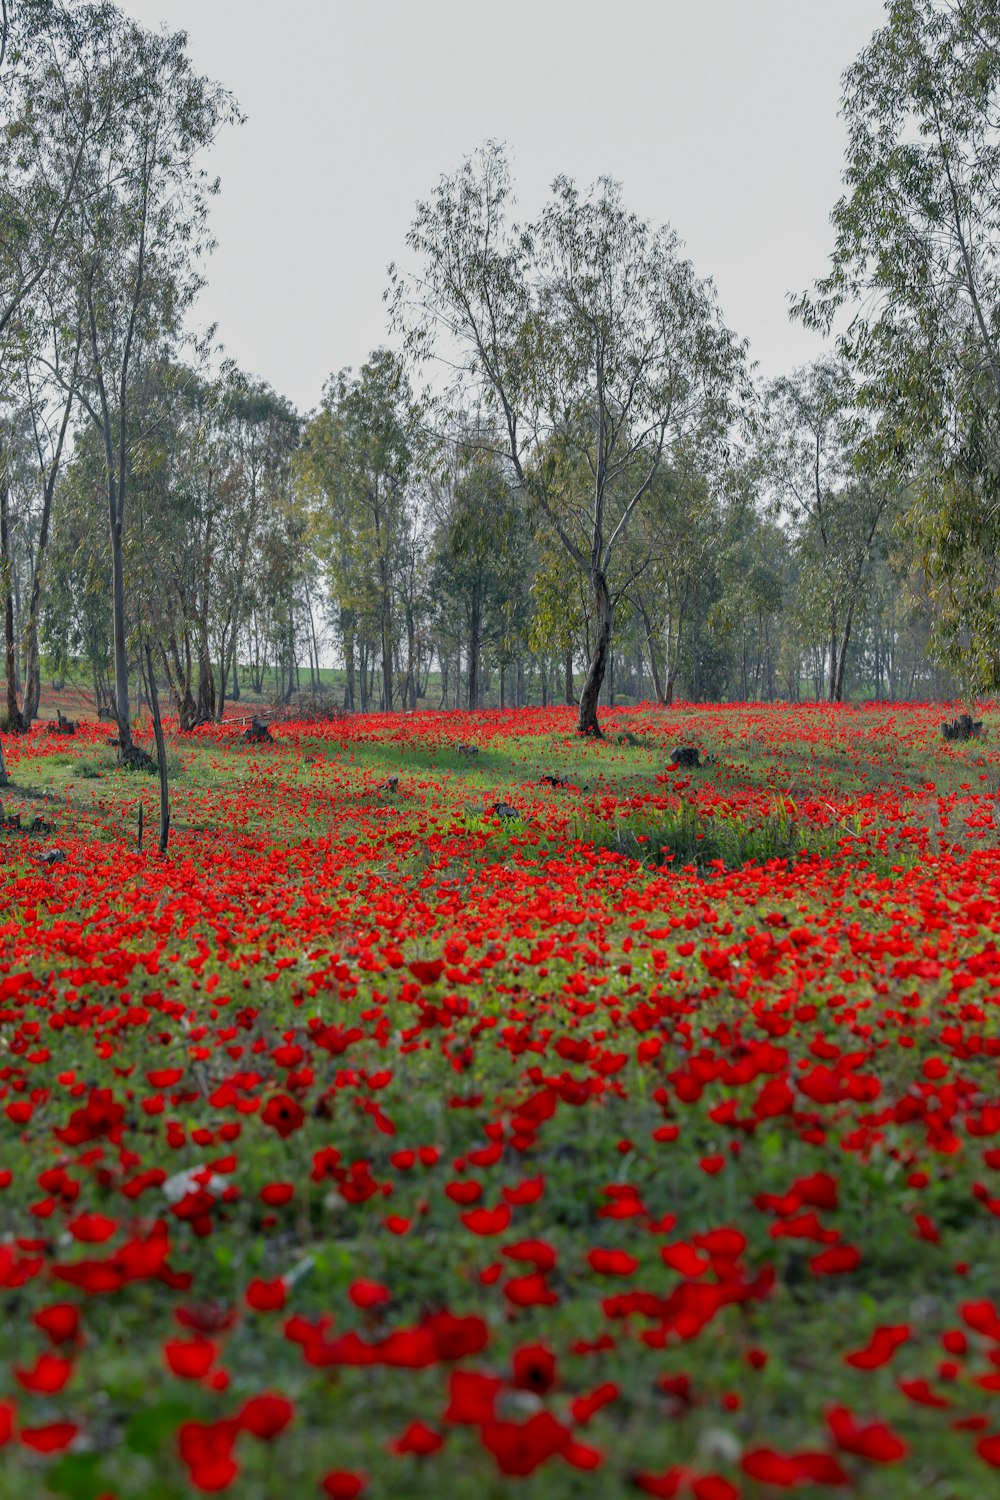 red flower field near trees during daytime